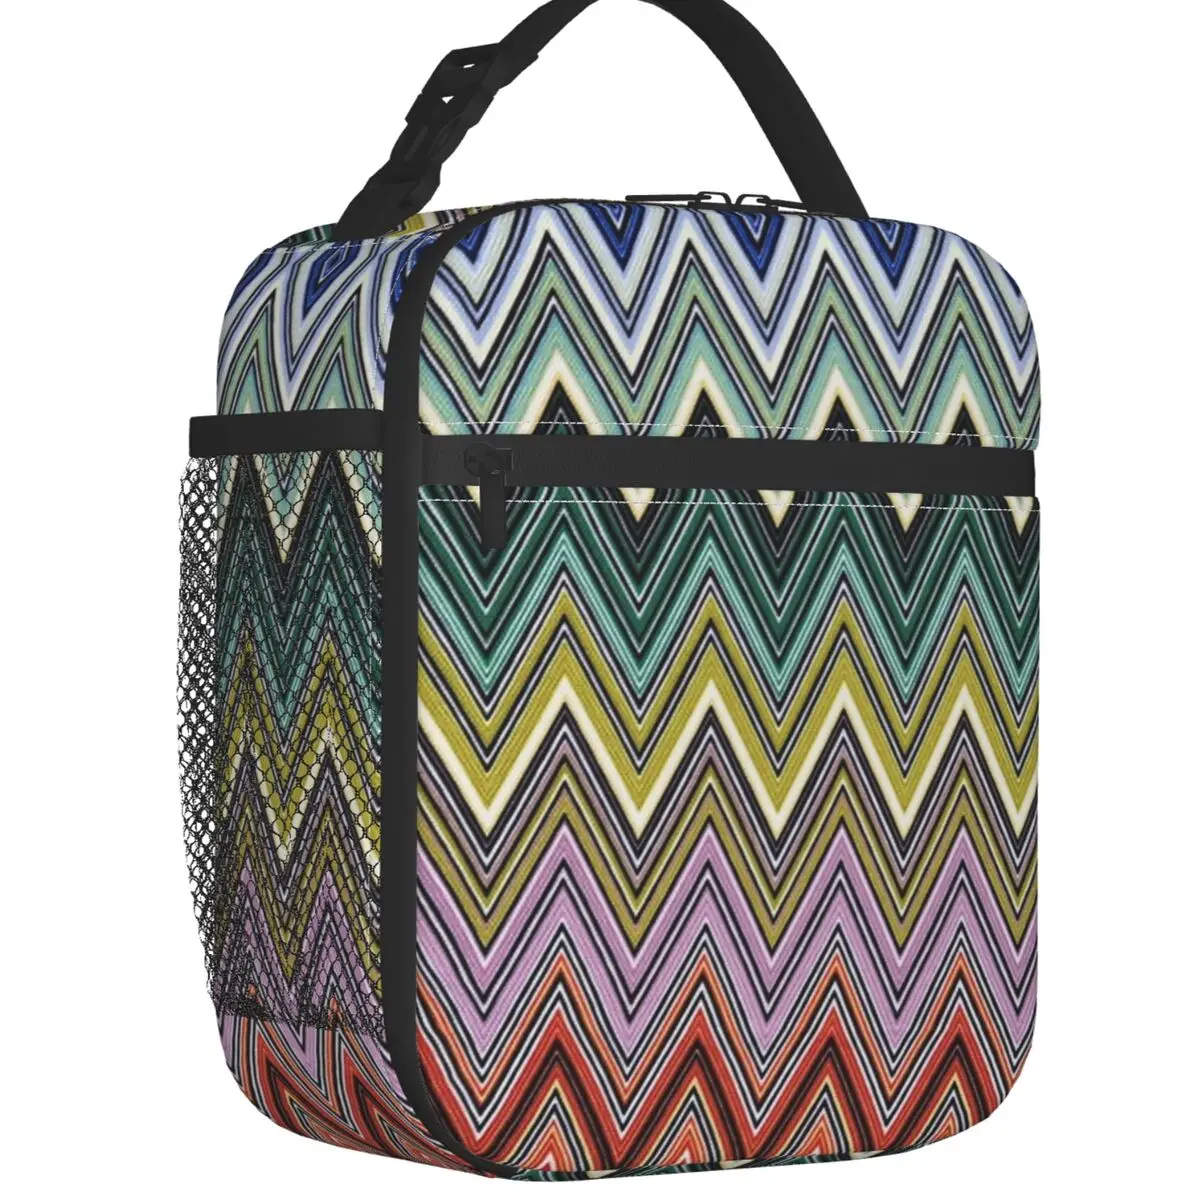 

Boho Home Zig Zag Insulated Lunch Bags for Camping Travel Chic Abstract Geometric Zigzag Resuable Cooler Thermal Bento Box Kids